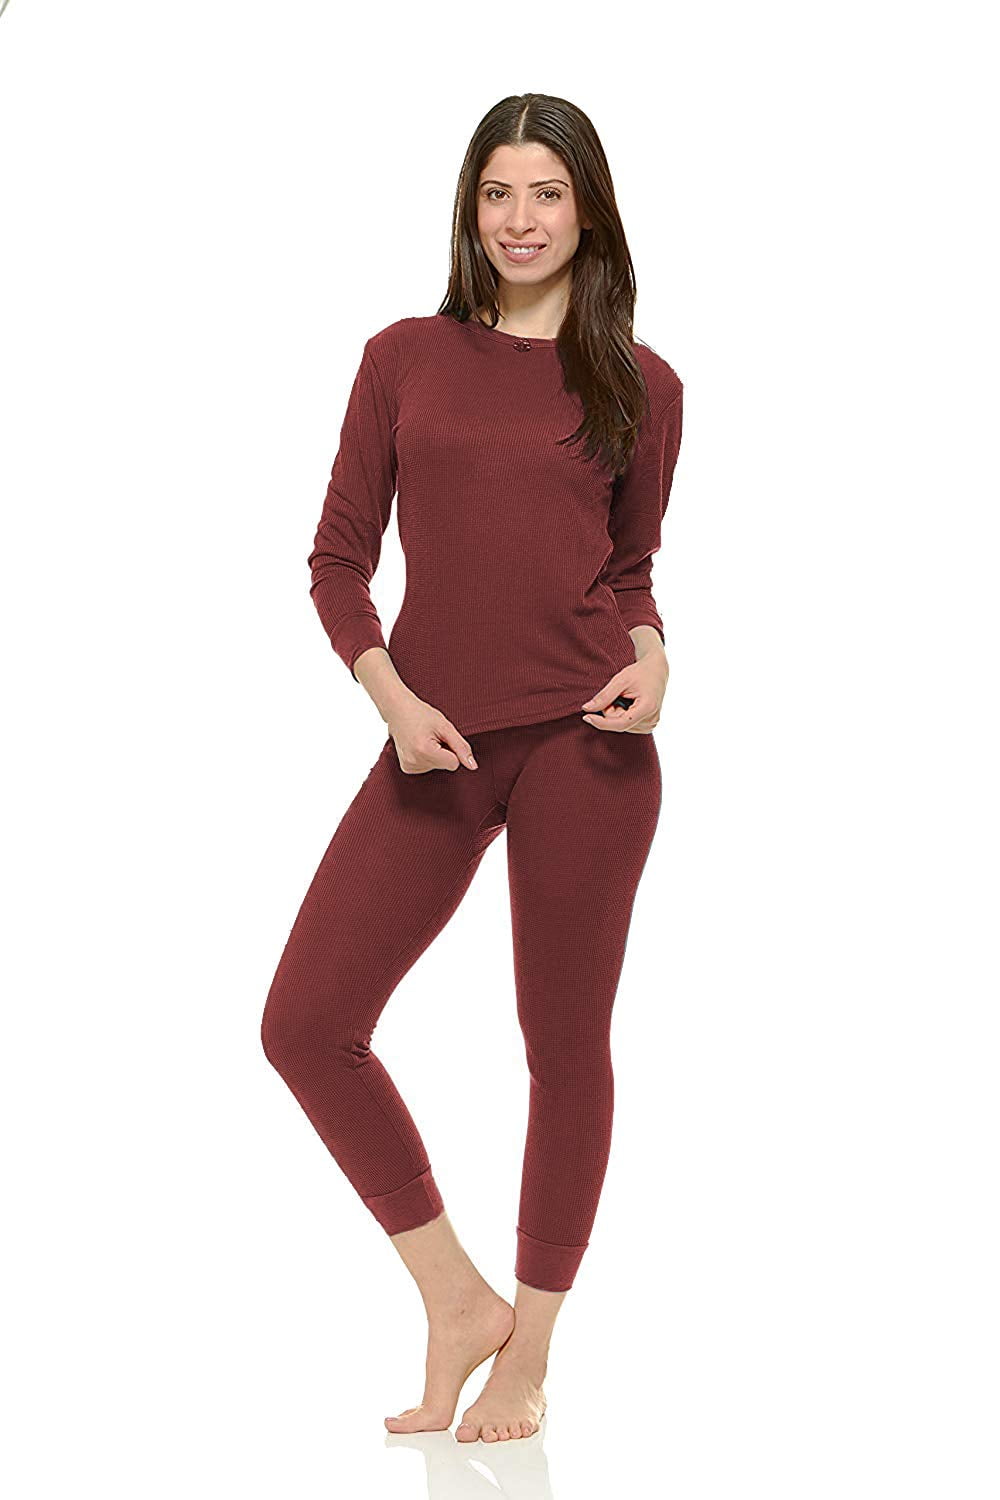 WUHOU Womens 100% Cotton Thermal Underwear Two Piece Long Johns Set WOMCOTHERMALSIZCOL 